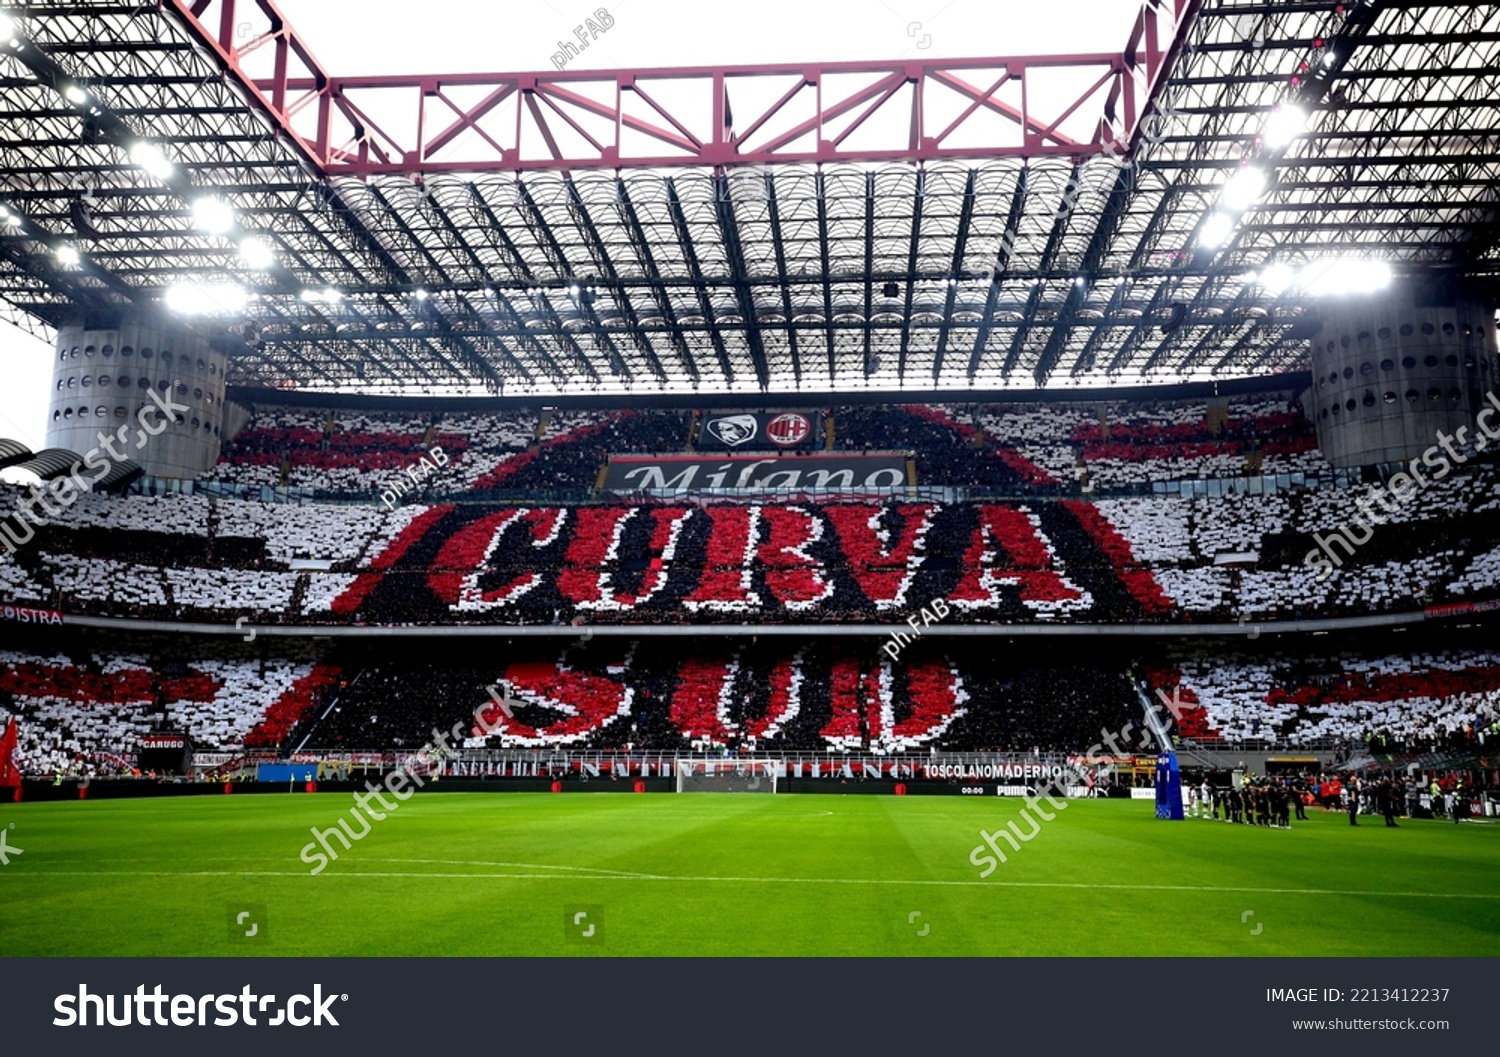 tobacco Earth Sanctuary 25 Choreography Of Milan's Fans Images, Stock Photos & Vectors |  Shutterstock